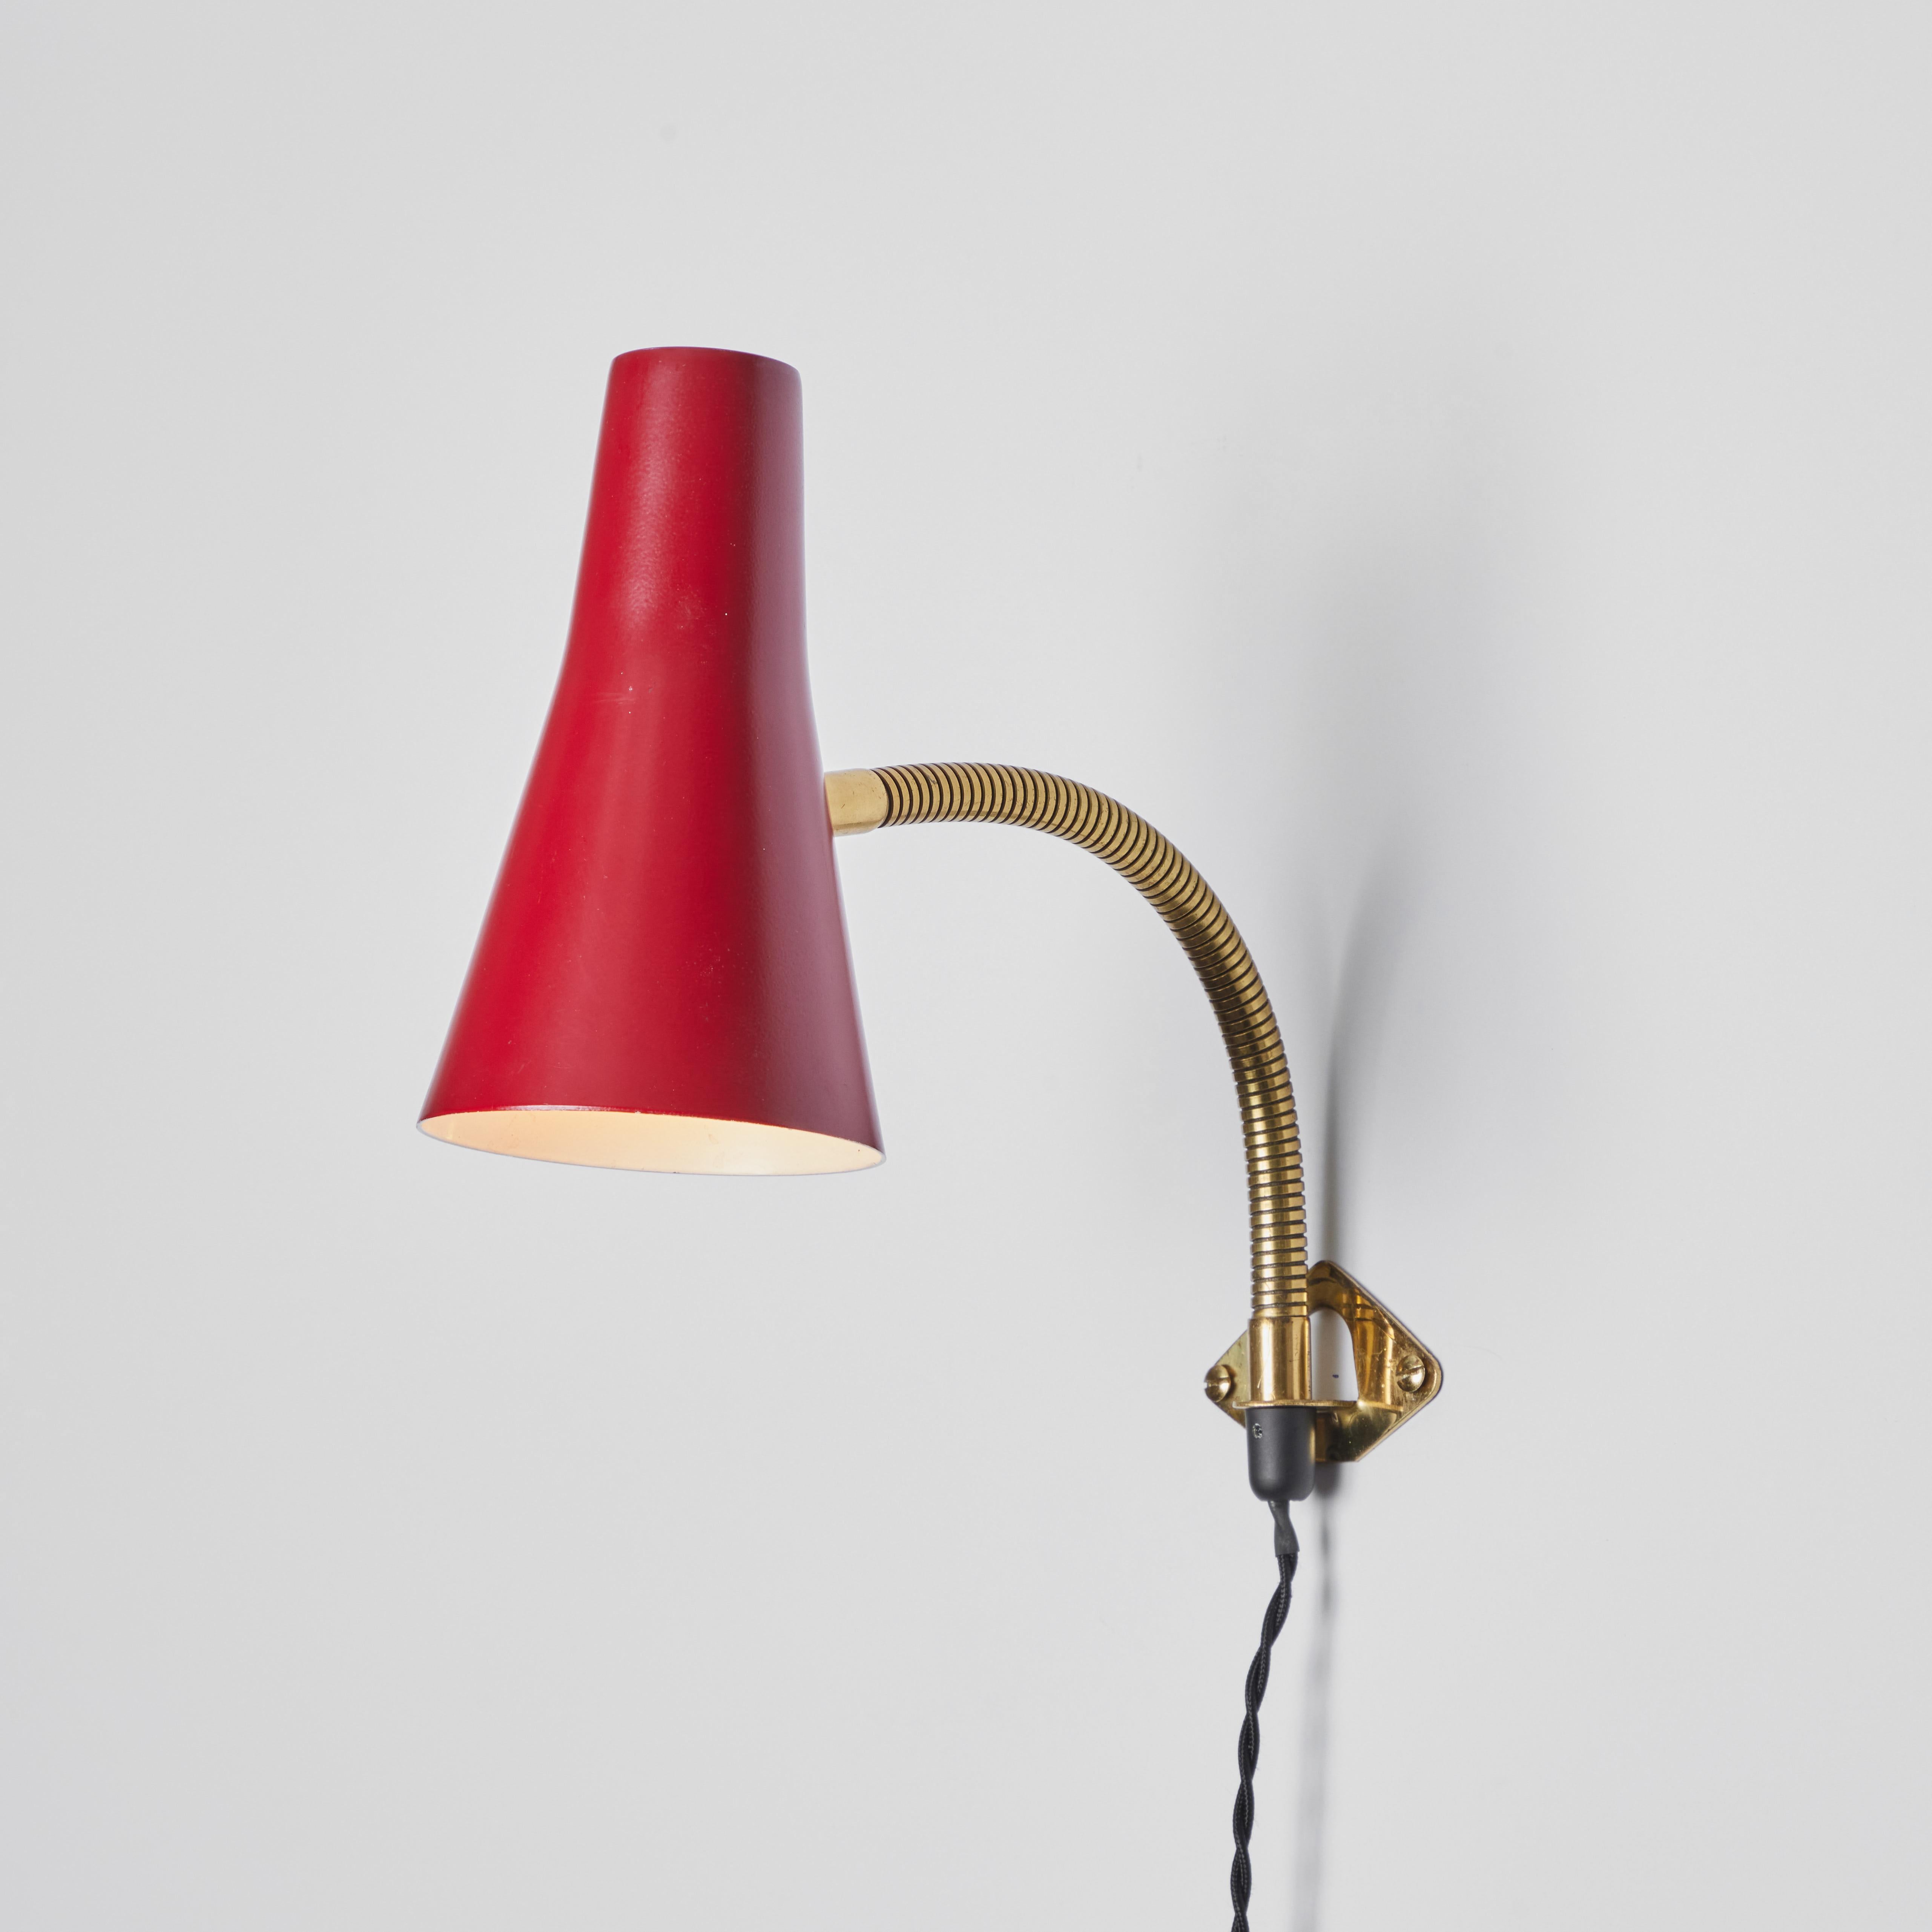 Finnish Pair of 1950s Lisa Johansson Pape Red Adjustable Wall Lights for Stockmann Orno For Sale